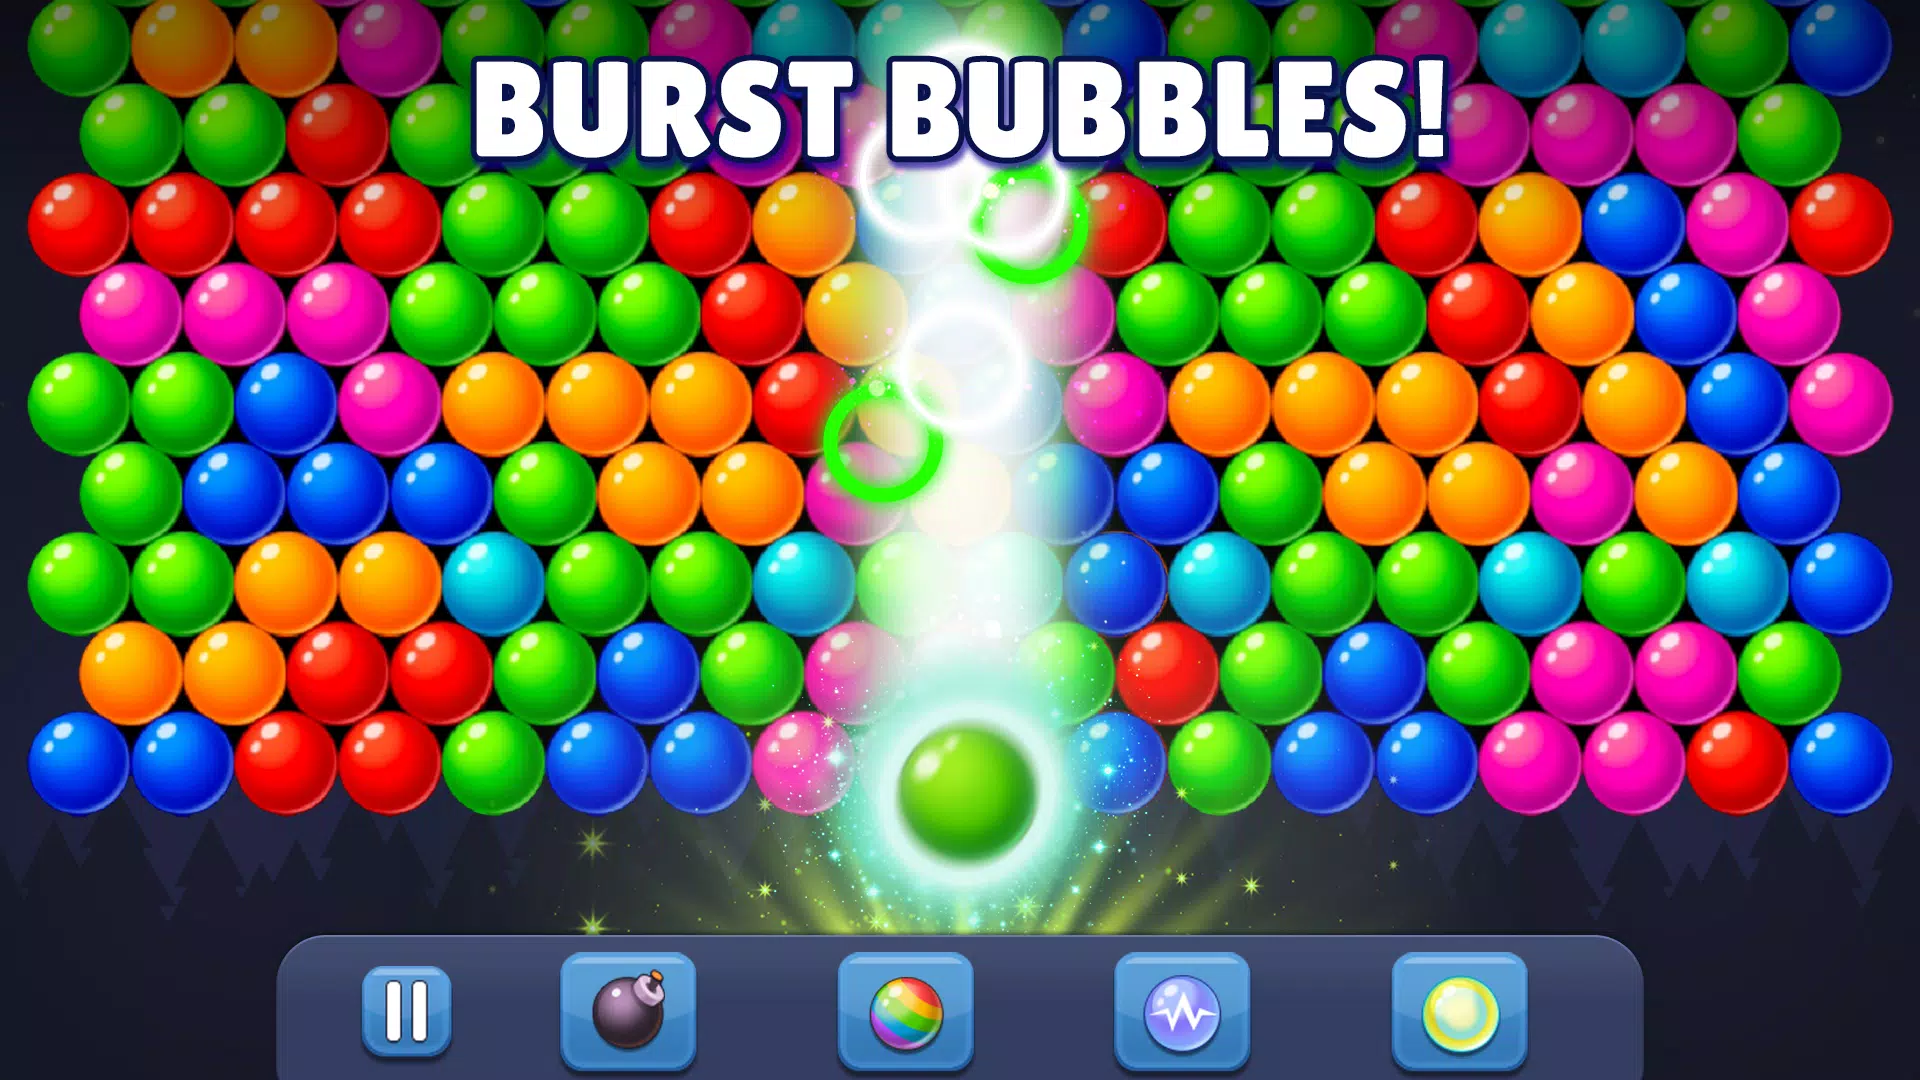 Bubble Game 3 Deluxe - Free Play & No Download